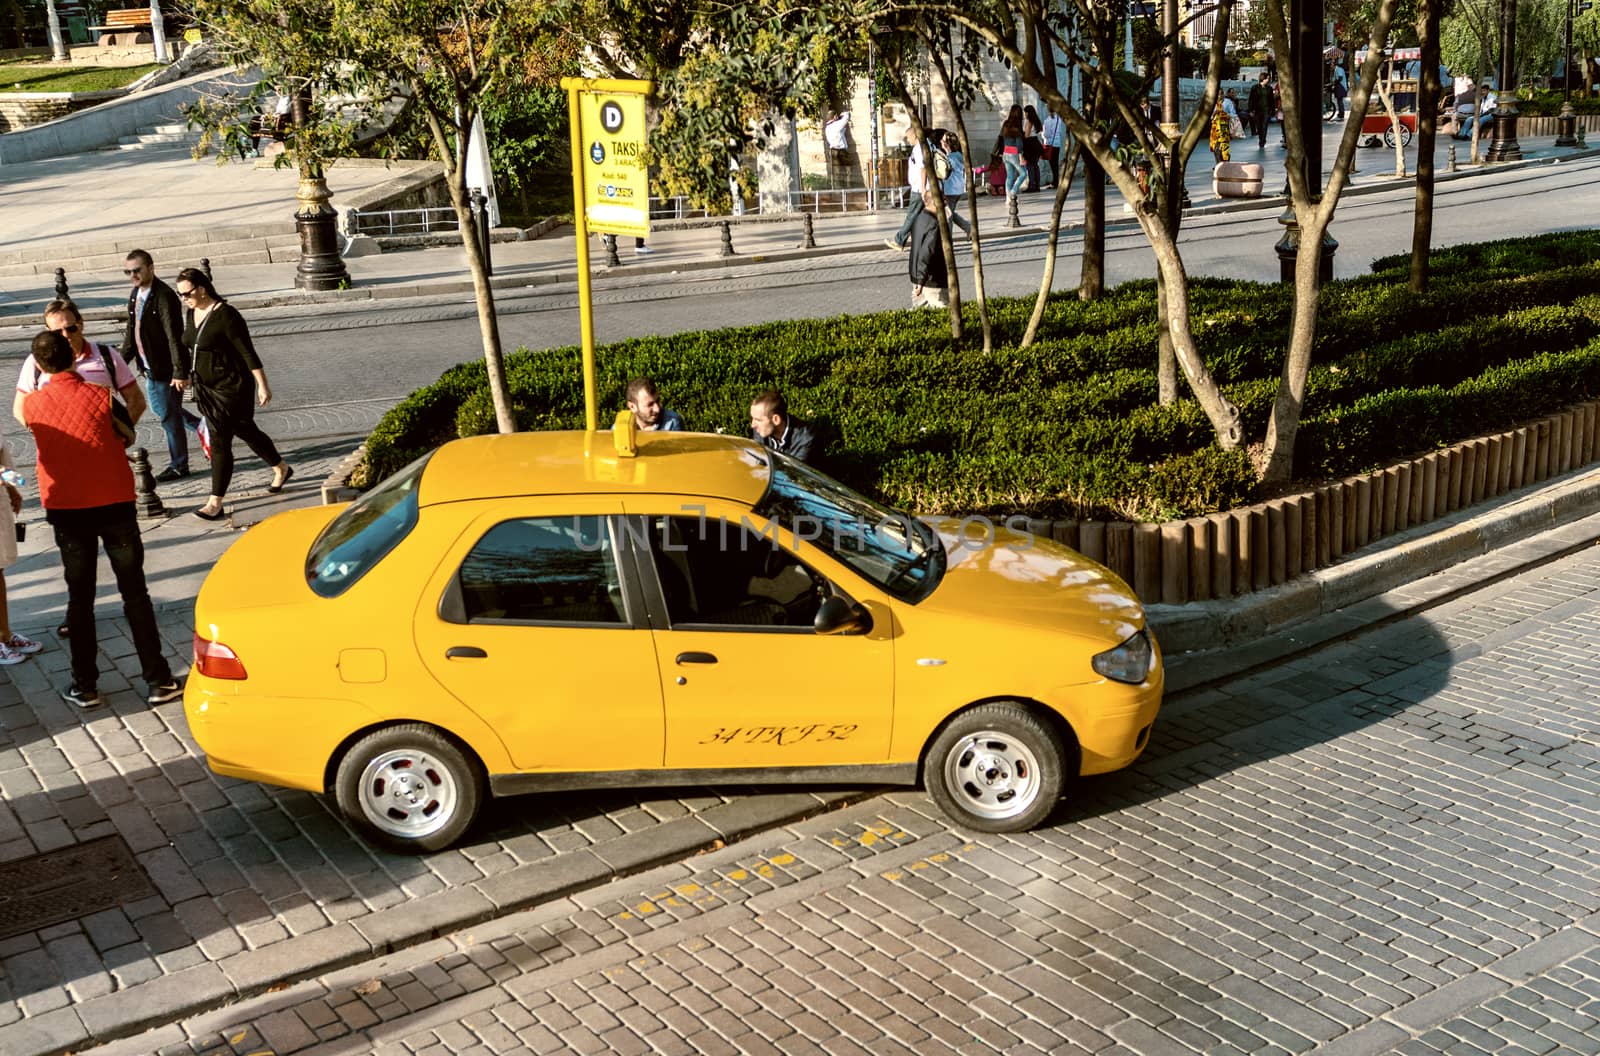 ISTANBUL - SEPTEMBER 21, 2014: Yellow taxis along city streets. by jovannig